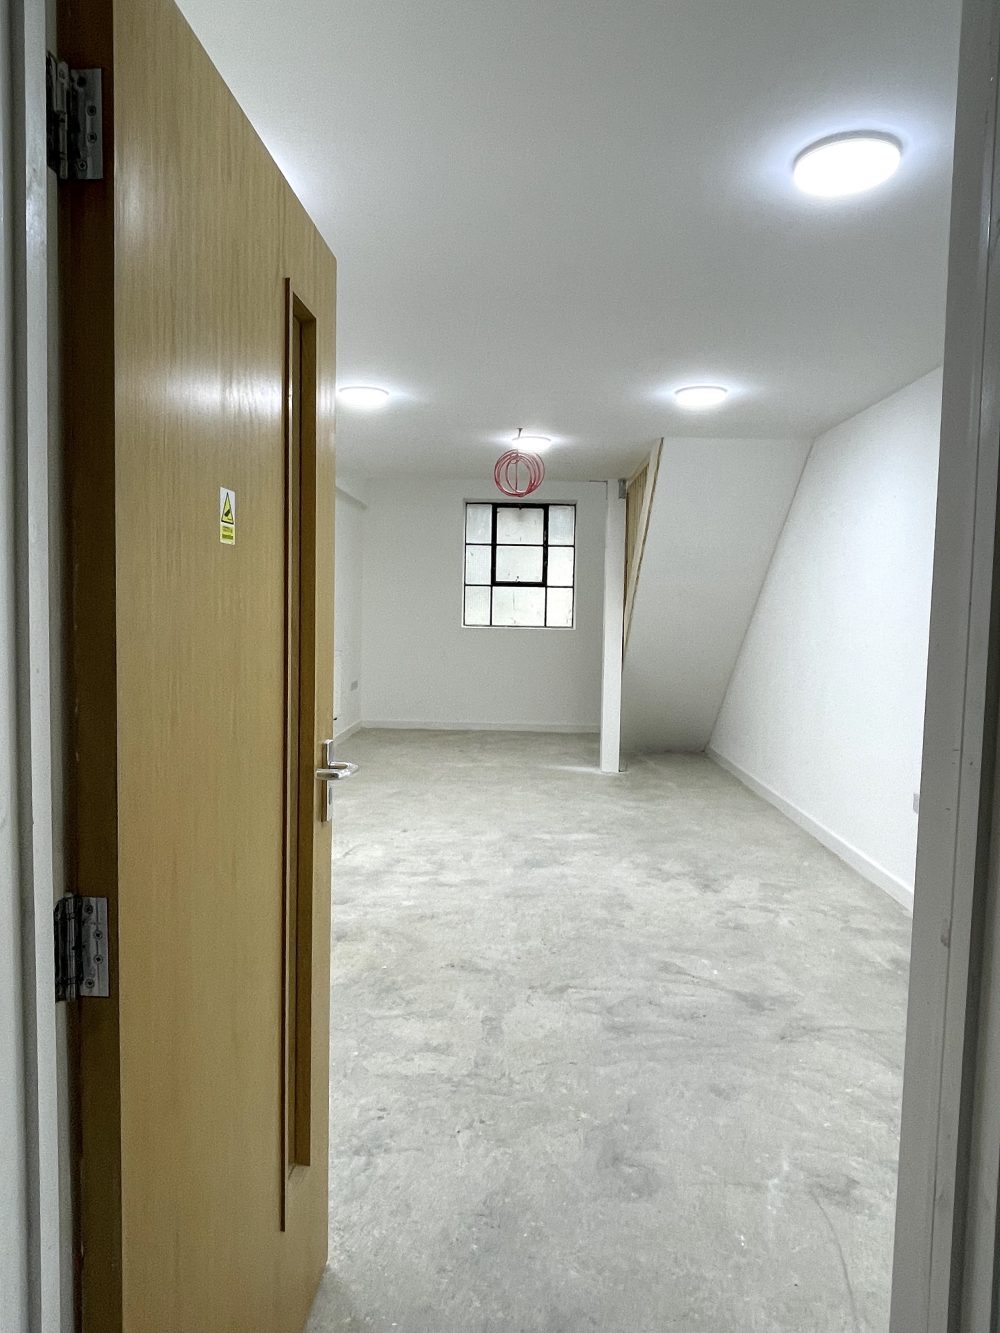 Creative live work style Studio flat Available to rent in EN3 Enfield Alxandra rd Pic3